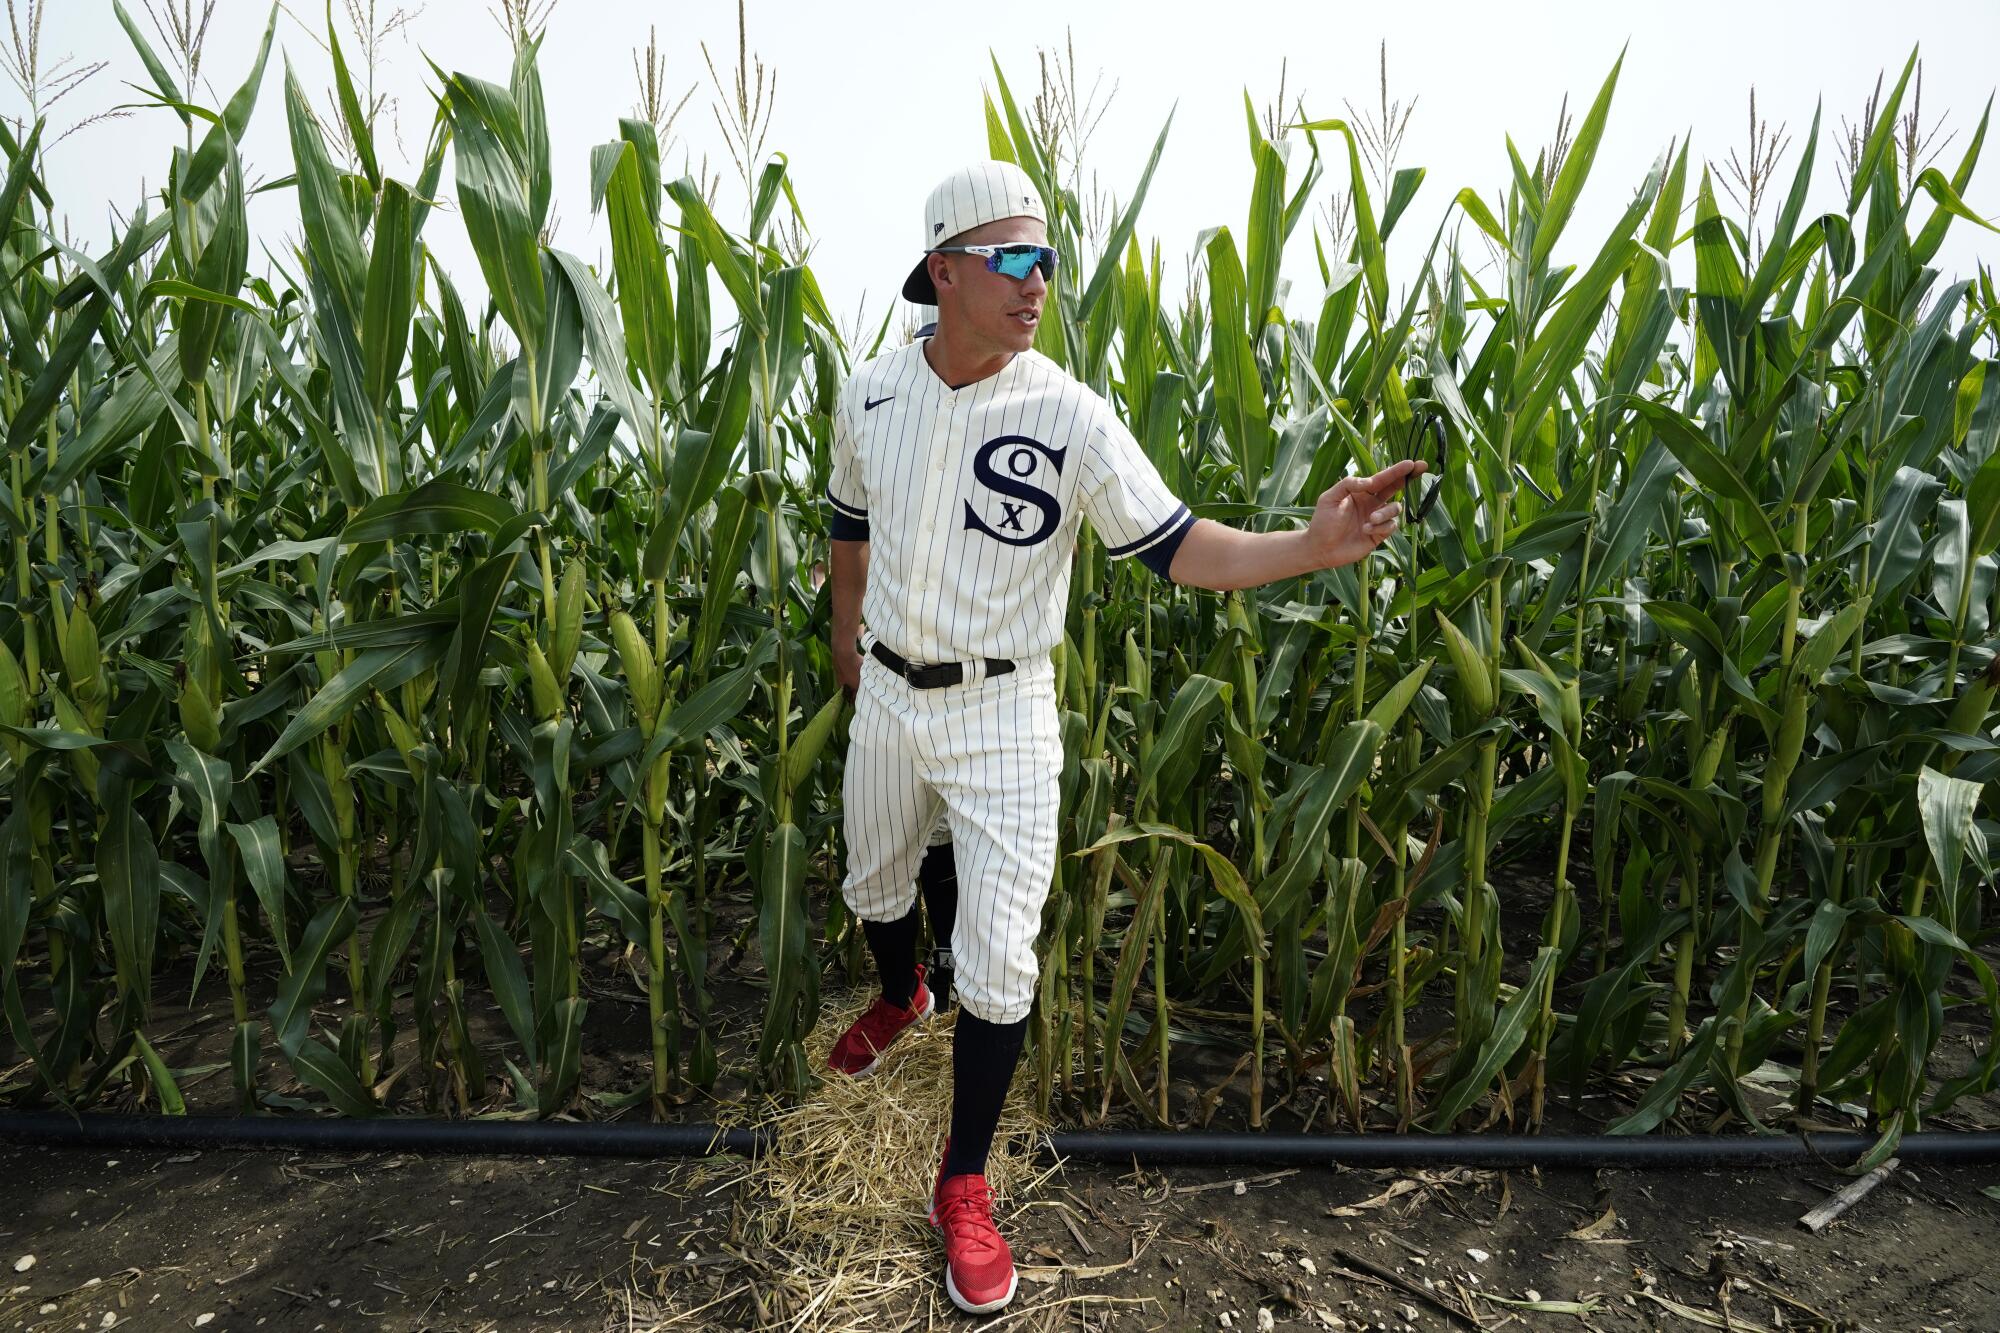 Take me out to the cornfield: See the Field of Dreams back in